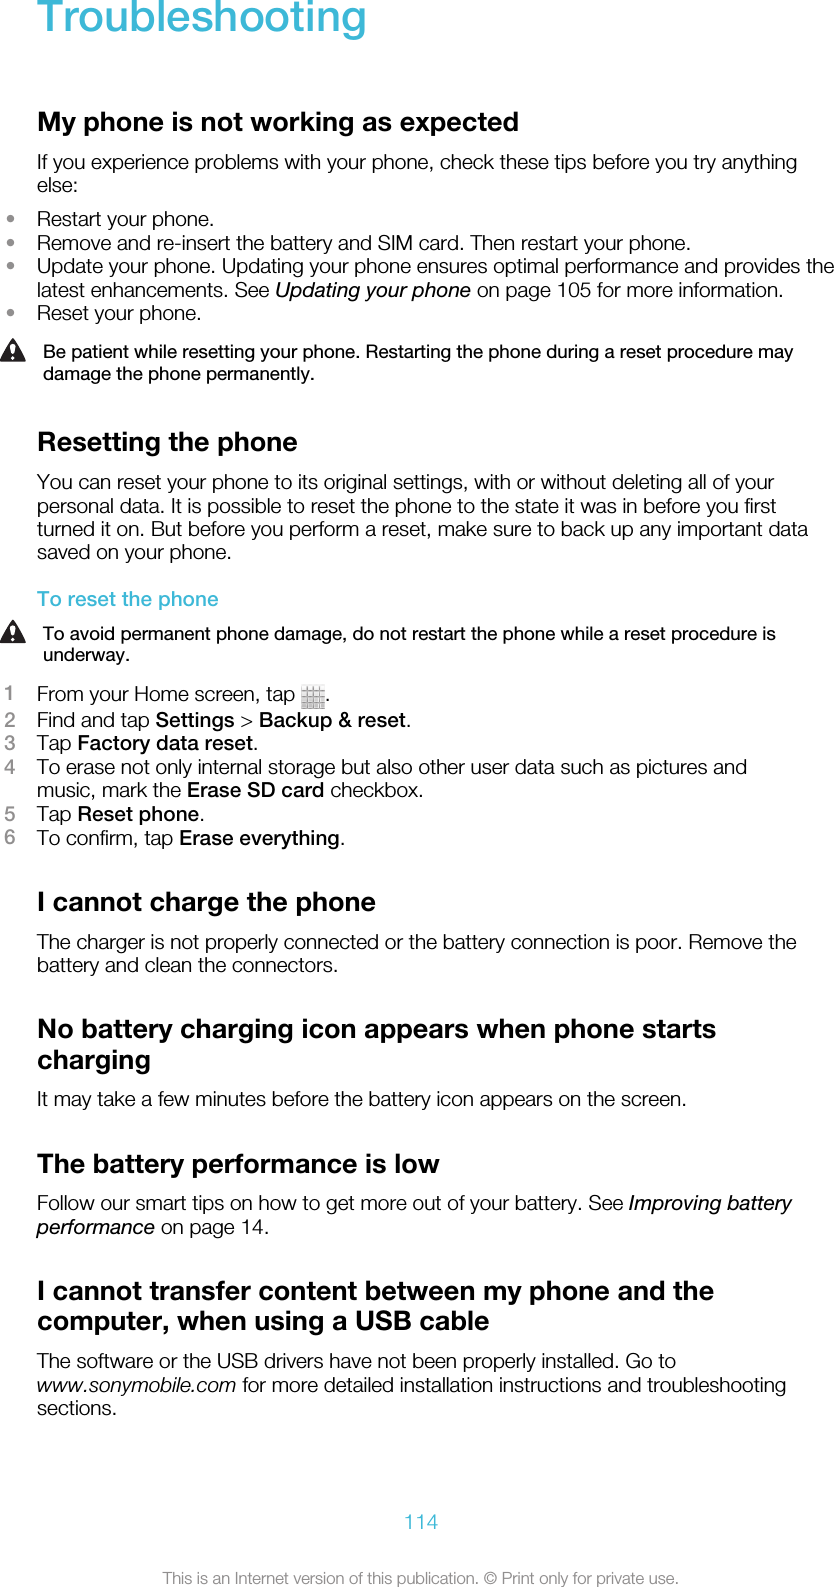 TroubleshootingMy phone is not working as expectedIf you experience problems with your phone, check these tips before you try anythingelse:•Restart your phone.•Remove and re-insert the battery and SIM card. Then restart your phone.•Update your phone. Updating your phone ensures optimal performance and provides thelatest enhancements. See Updating your phone on page 105 for more information.•Reset your phone.Be patient while resetting your phone. Restarting the phone during a reset procedure maydamage the phone permanently.Resetting the phoneYou can reset your phone to its original settings, with or without deleting all of yourpersonal data. It is possible to reset the phone to the state it was in before you firstturned it on. But before you perform a reset, make sure to back up any important datasaved on your phone.To reset the phoneTo avoid permanent phone damage, do not restart the phone while a reset procedure isunderway.1From your Home screen, tap  .2Find and tap Settings &gt; Backup &amp; reset.3Tap Factory data reset.4To erase not only internal storage but also other user data such as pictures andmusic, mark the Erase SD card checkbox.5Tap Reset phone.6To confirm, tap Erase everything.I cannot charge the phoneThe charger is not properly connected or the battery connection is poor. Remove thebattery and clean the connectors.No battery charging icon appears when phone startschargingIt may take a few minutes before the battery icon appears on the screen.The battery performance is lowFollow our smart tips on how to get more out of your battery. See Improving batteryperformance on page 14.I cannot transfer content between my phone and thecomputer, when using a USB cableThe software or the USB drivers have not been properly installed. Go towww.sonymobile.com for more detailed installation instructions and troubleshootingsections.114This is an Internet version of this publication. © Print only for private use.